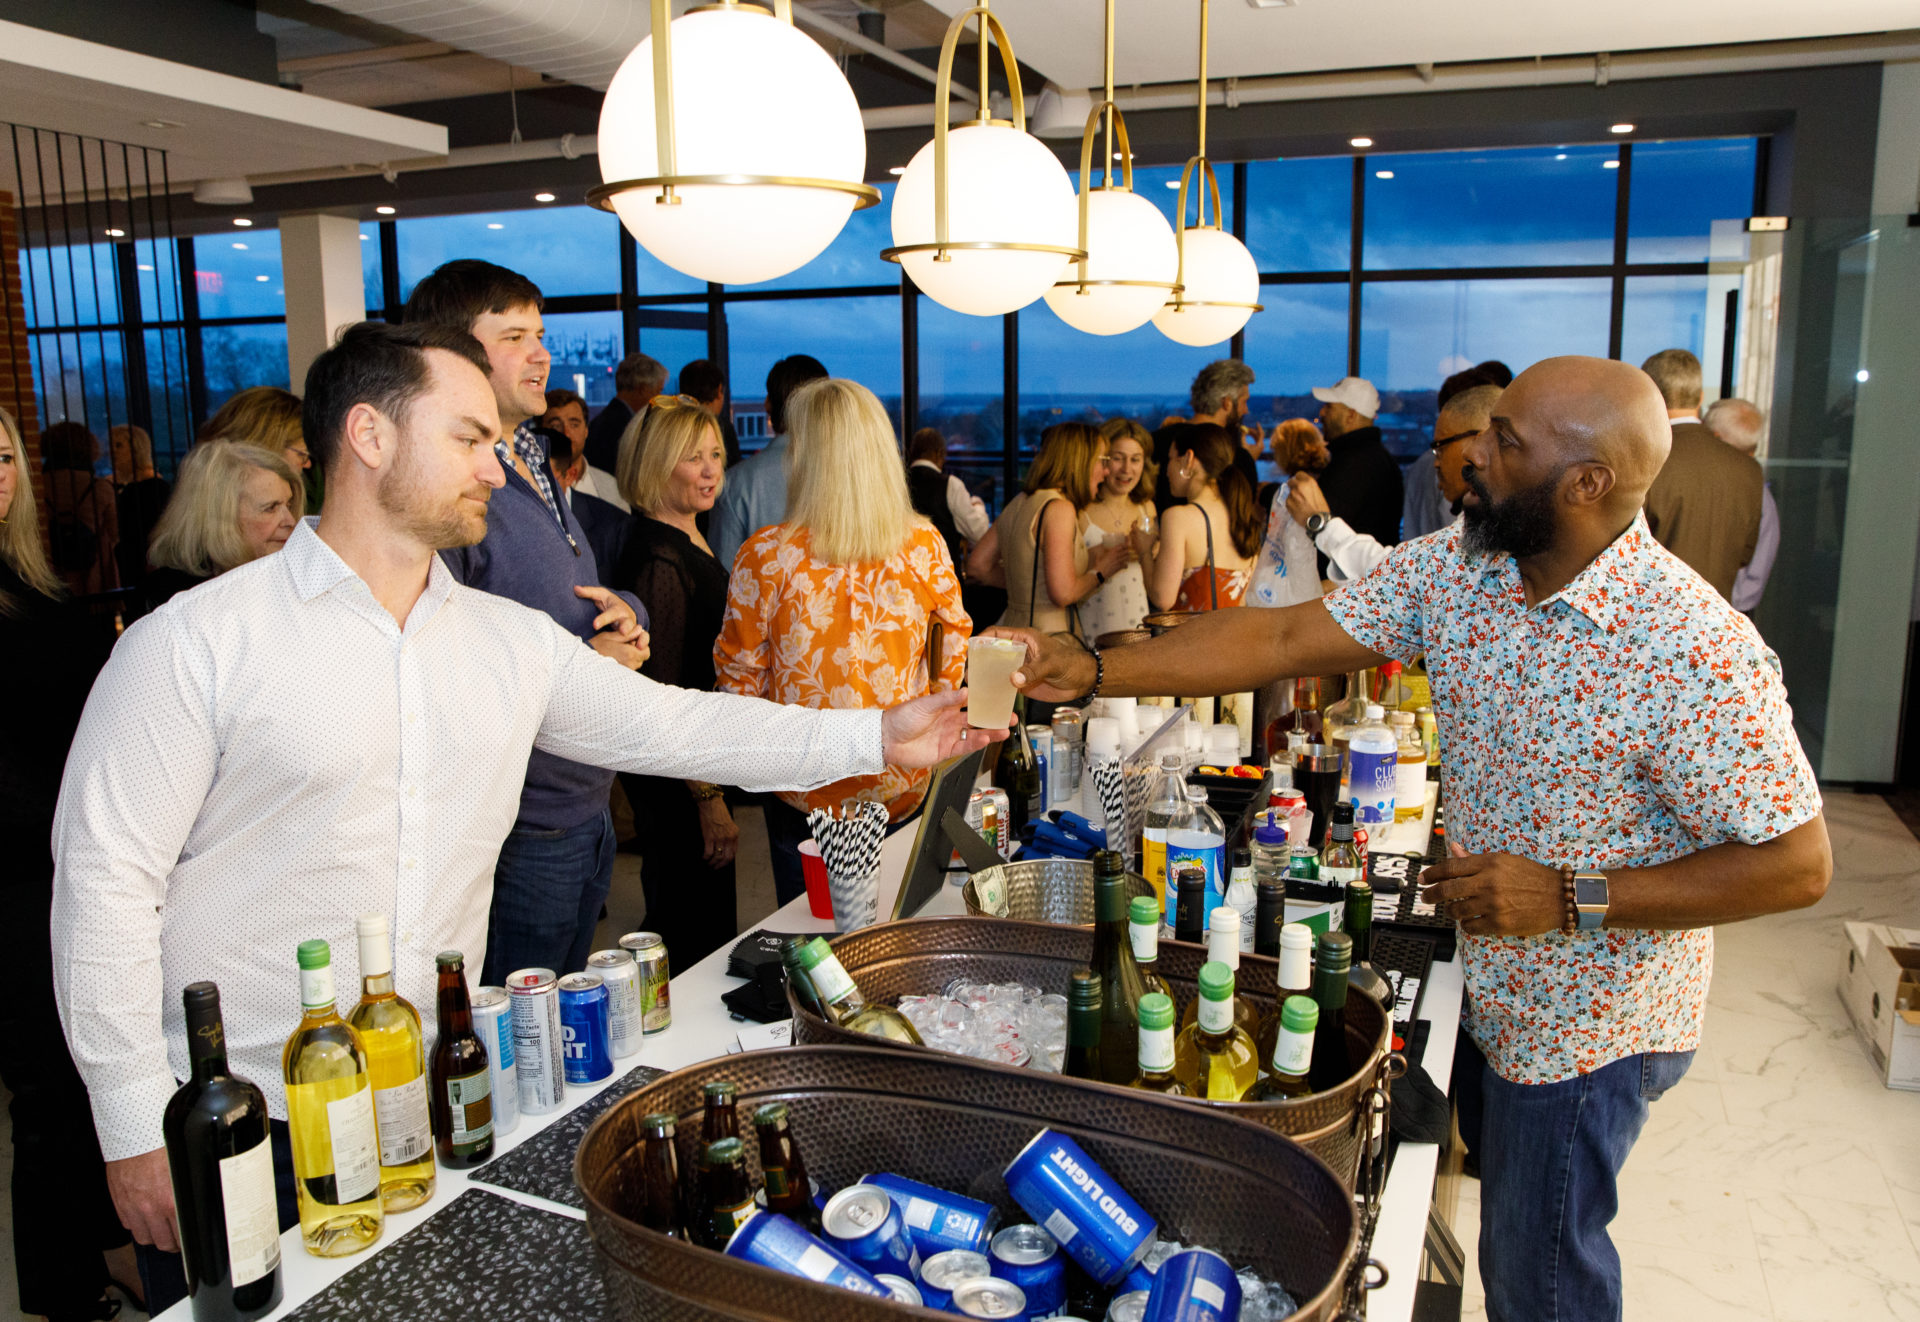 Colleagues enjoy themselves at their company event, toasting over the marble bar at Above.